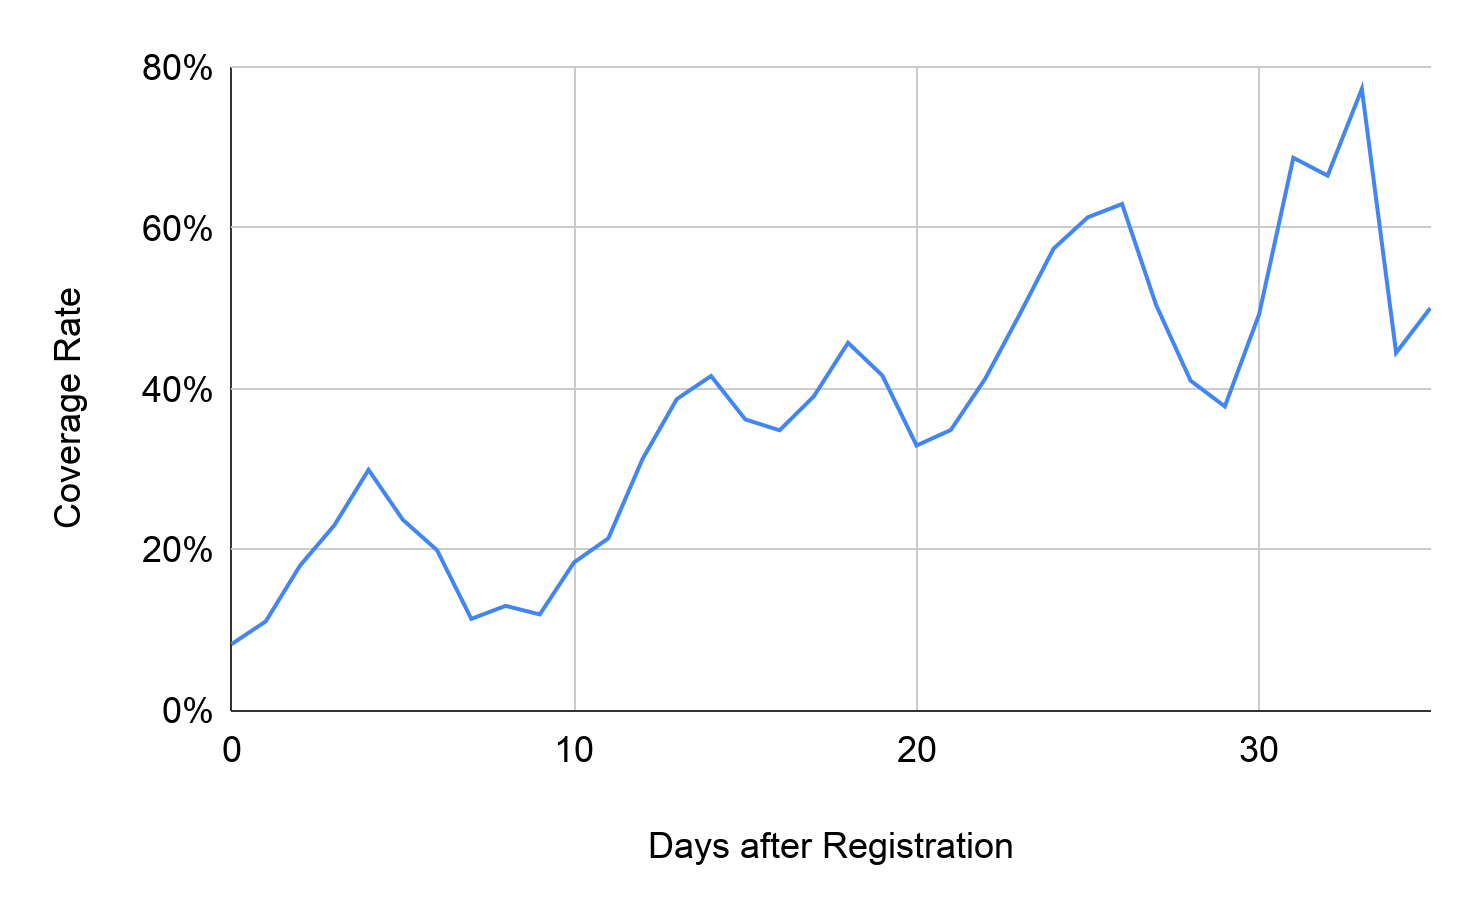 In contrast to the proactive DNS security approach, the public-scanner detects malicious domains significantly after registration, often after malicious activity has begun. Here, the x-axis represents days after registration and the y-axis represents coverage rate. The public scanner's coverage is shown by a blue line. 